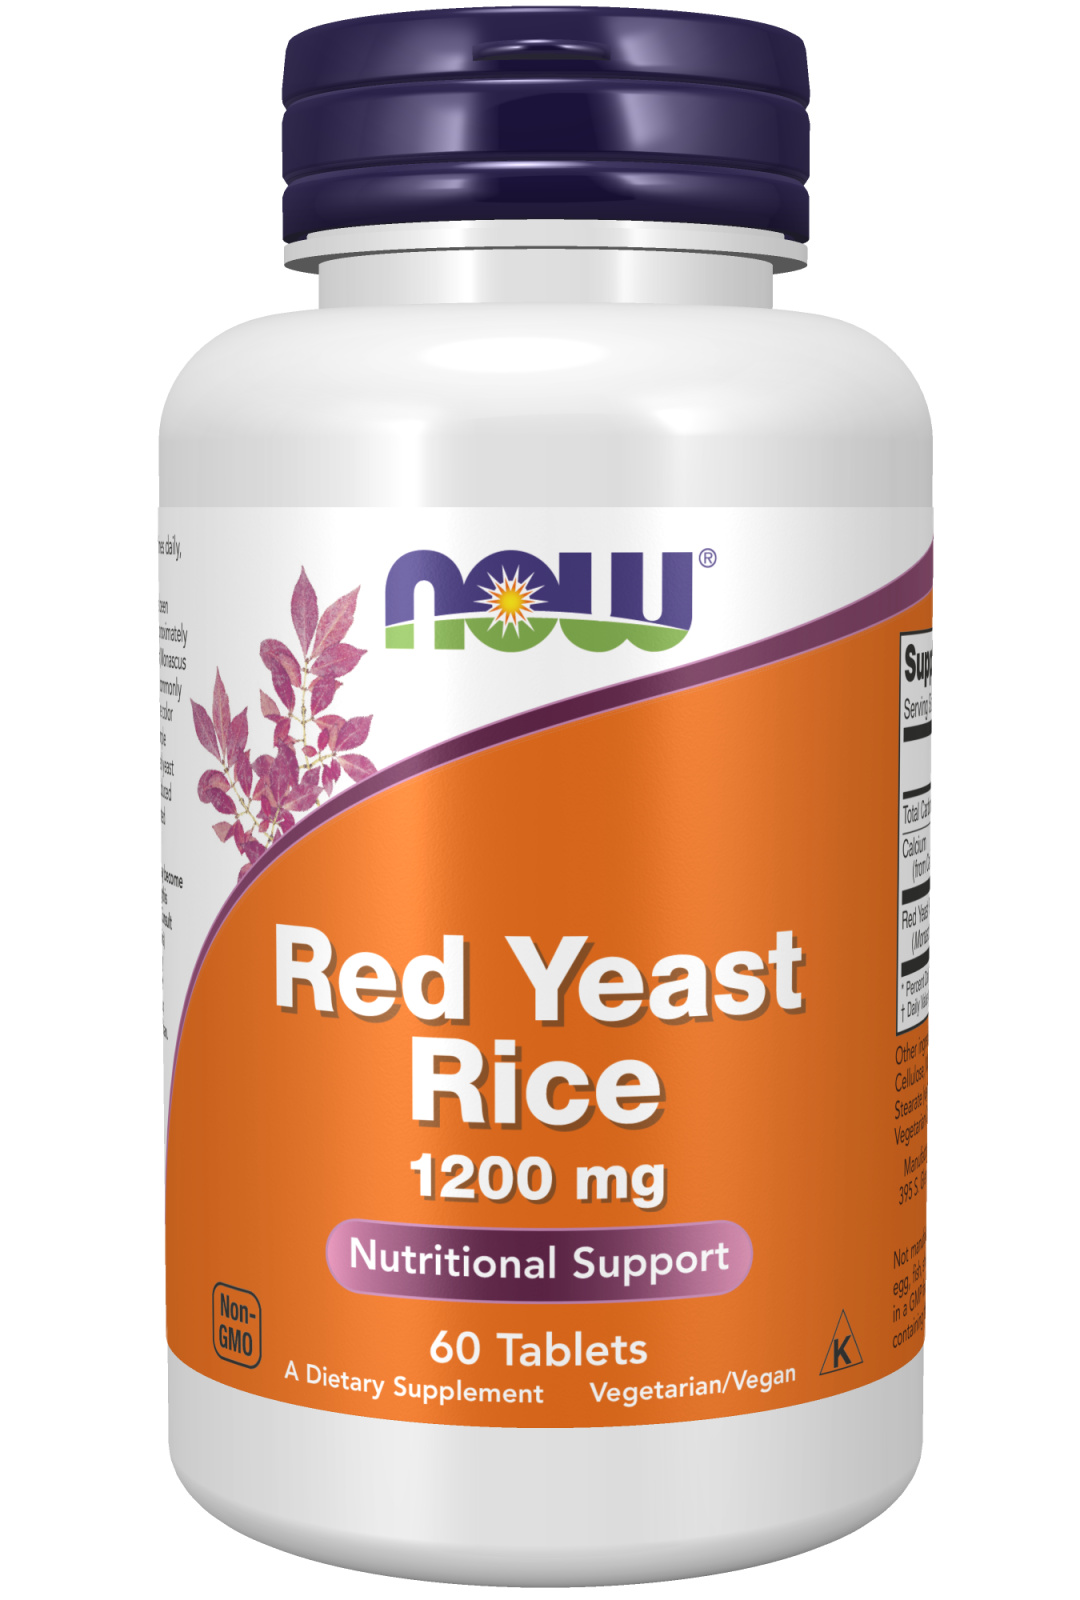 Red Yeast Rice 1200 mg - 60 Tablets Bottle Front